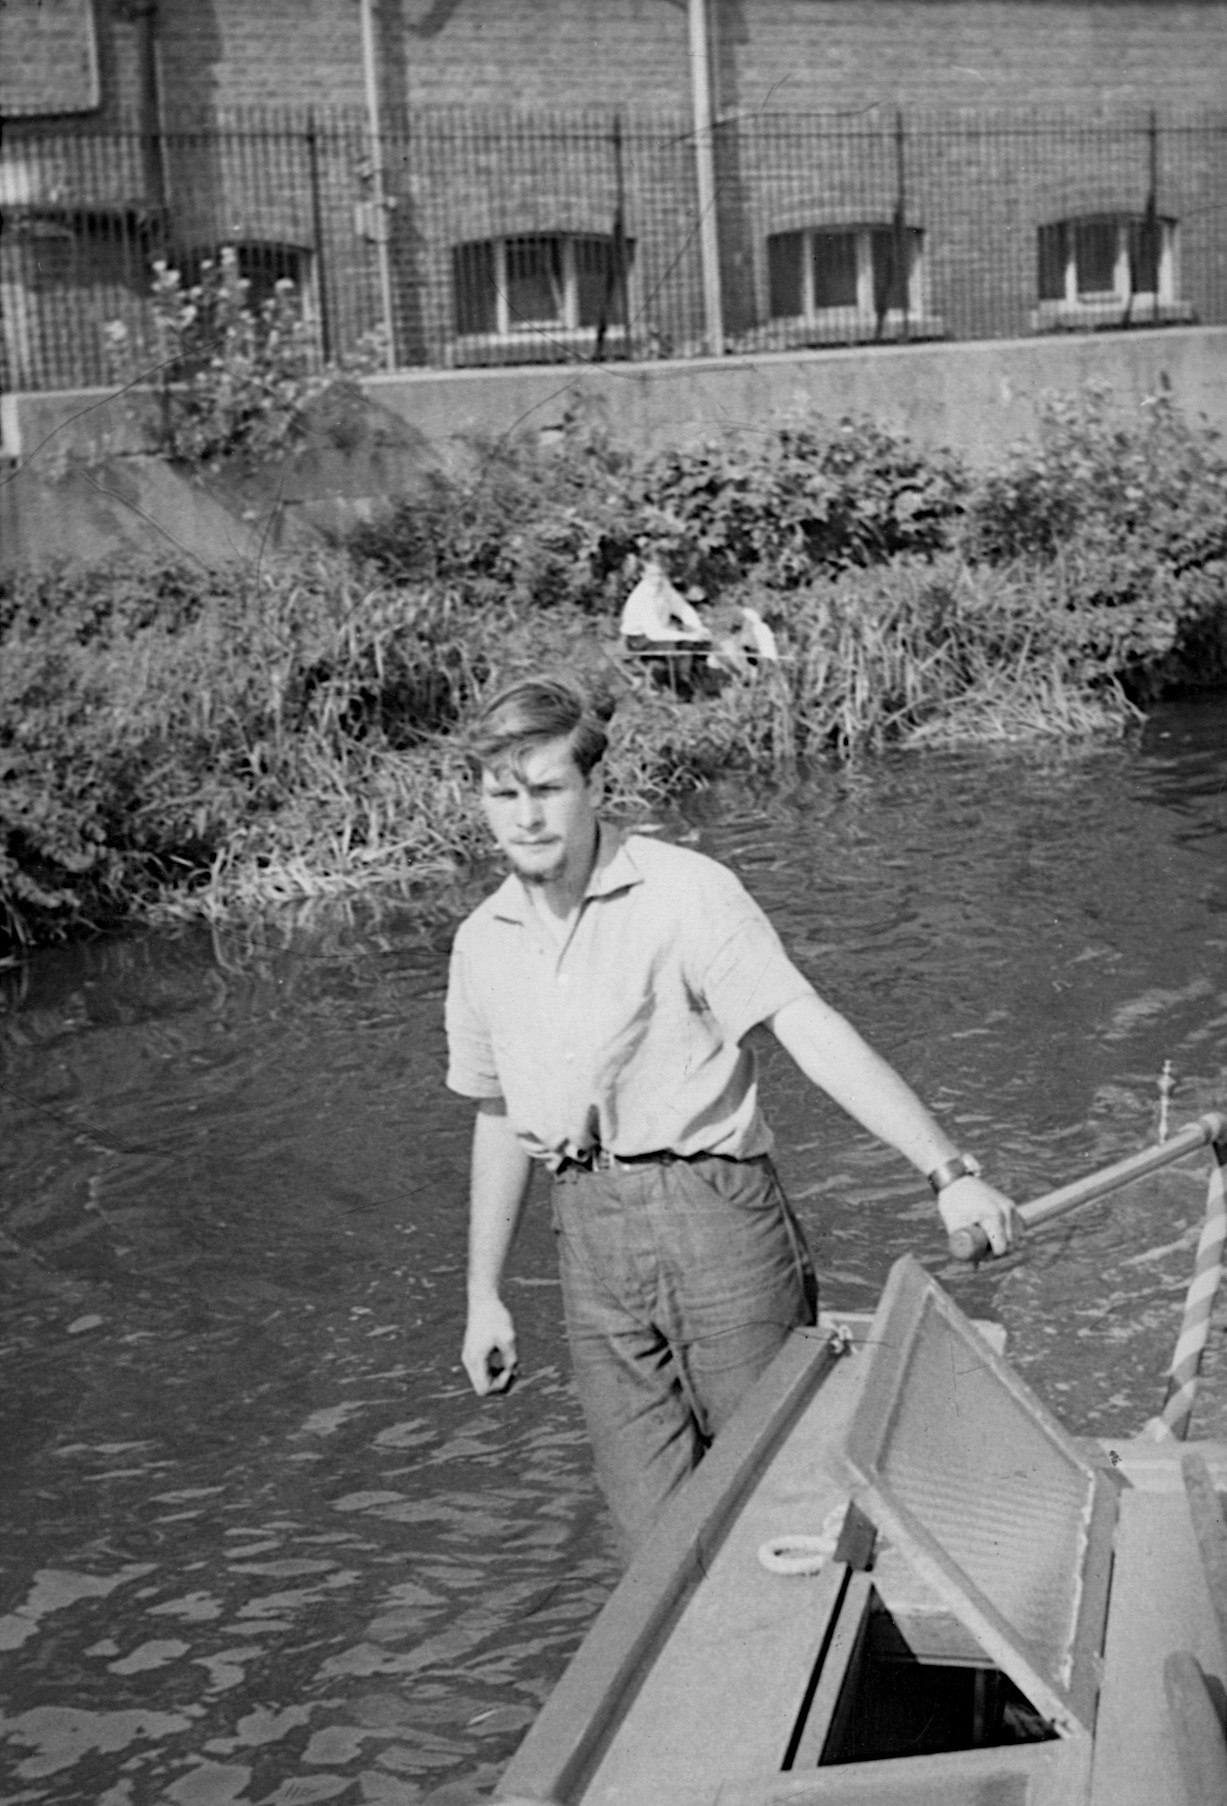 Bob on canal boat, 19??